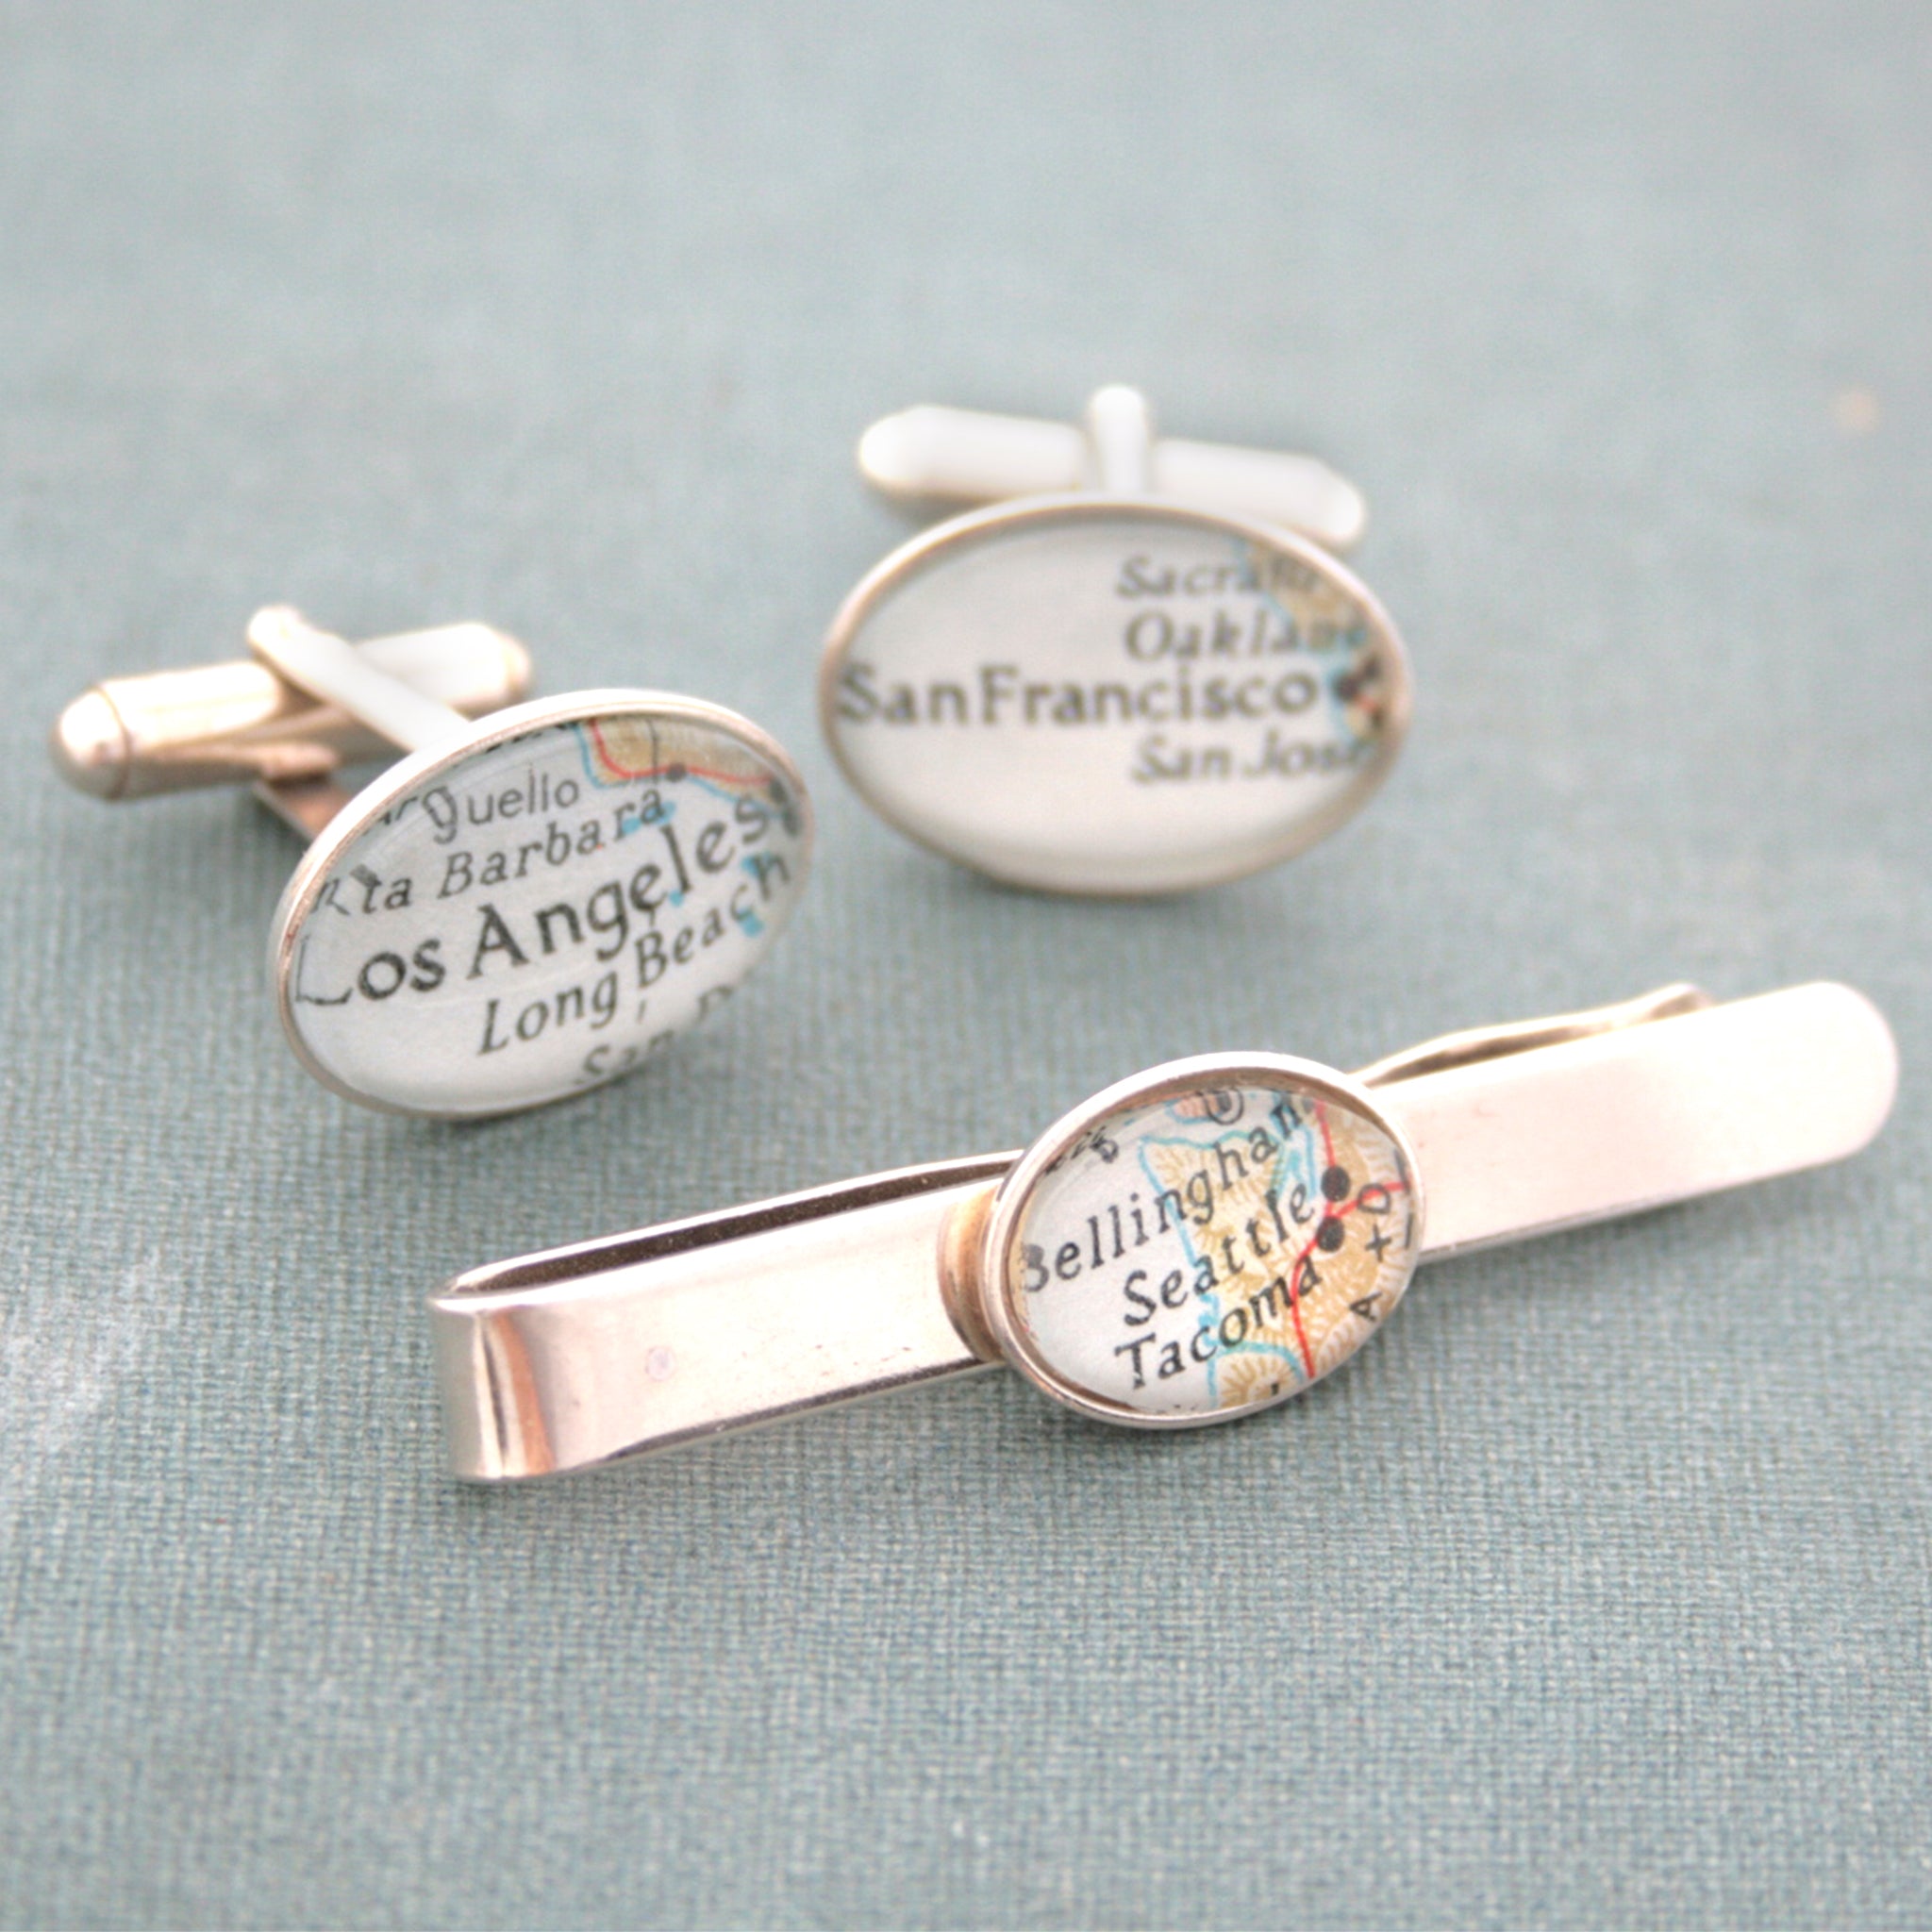 Sterling Silver Tie Clip and Cufflinks set featuring custom map locations